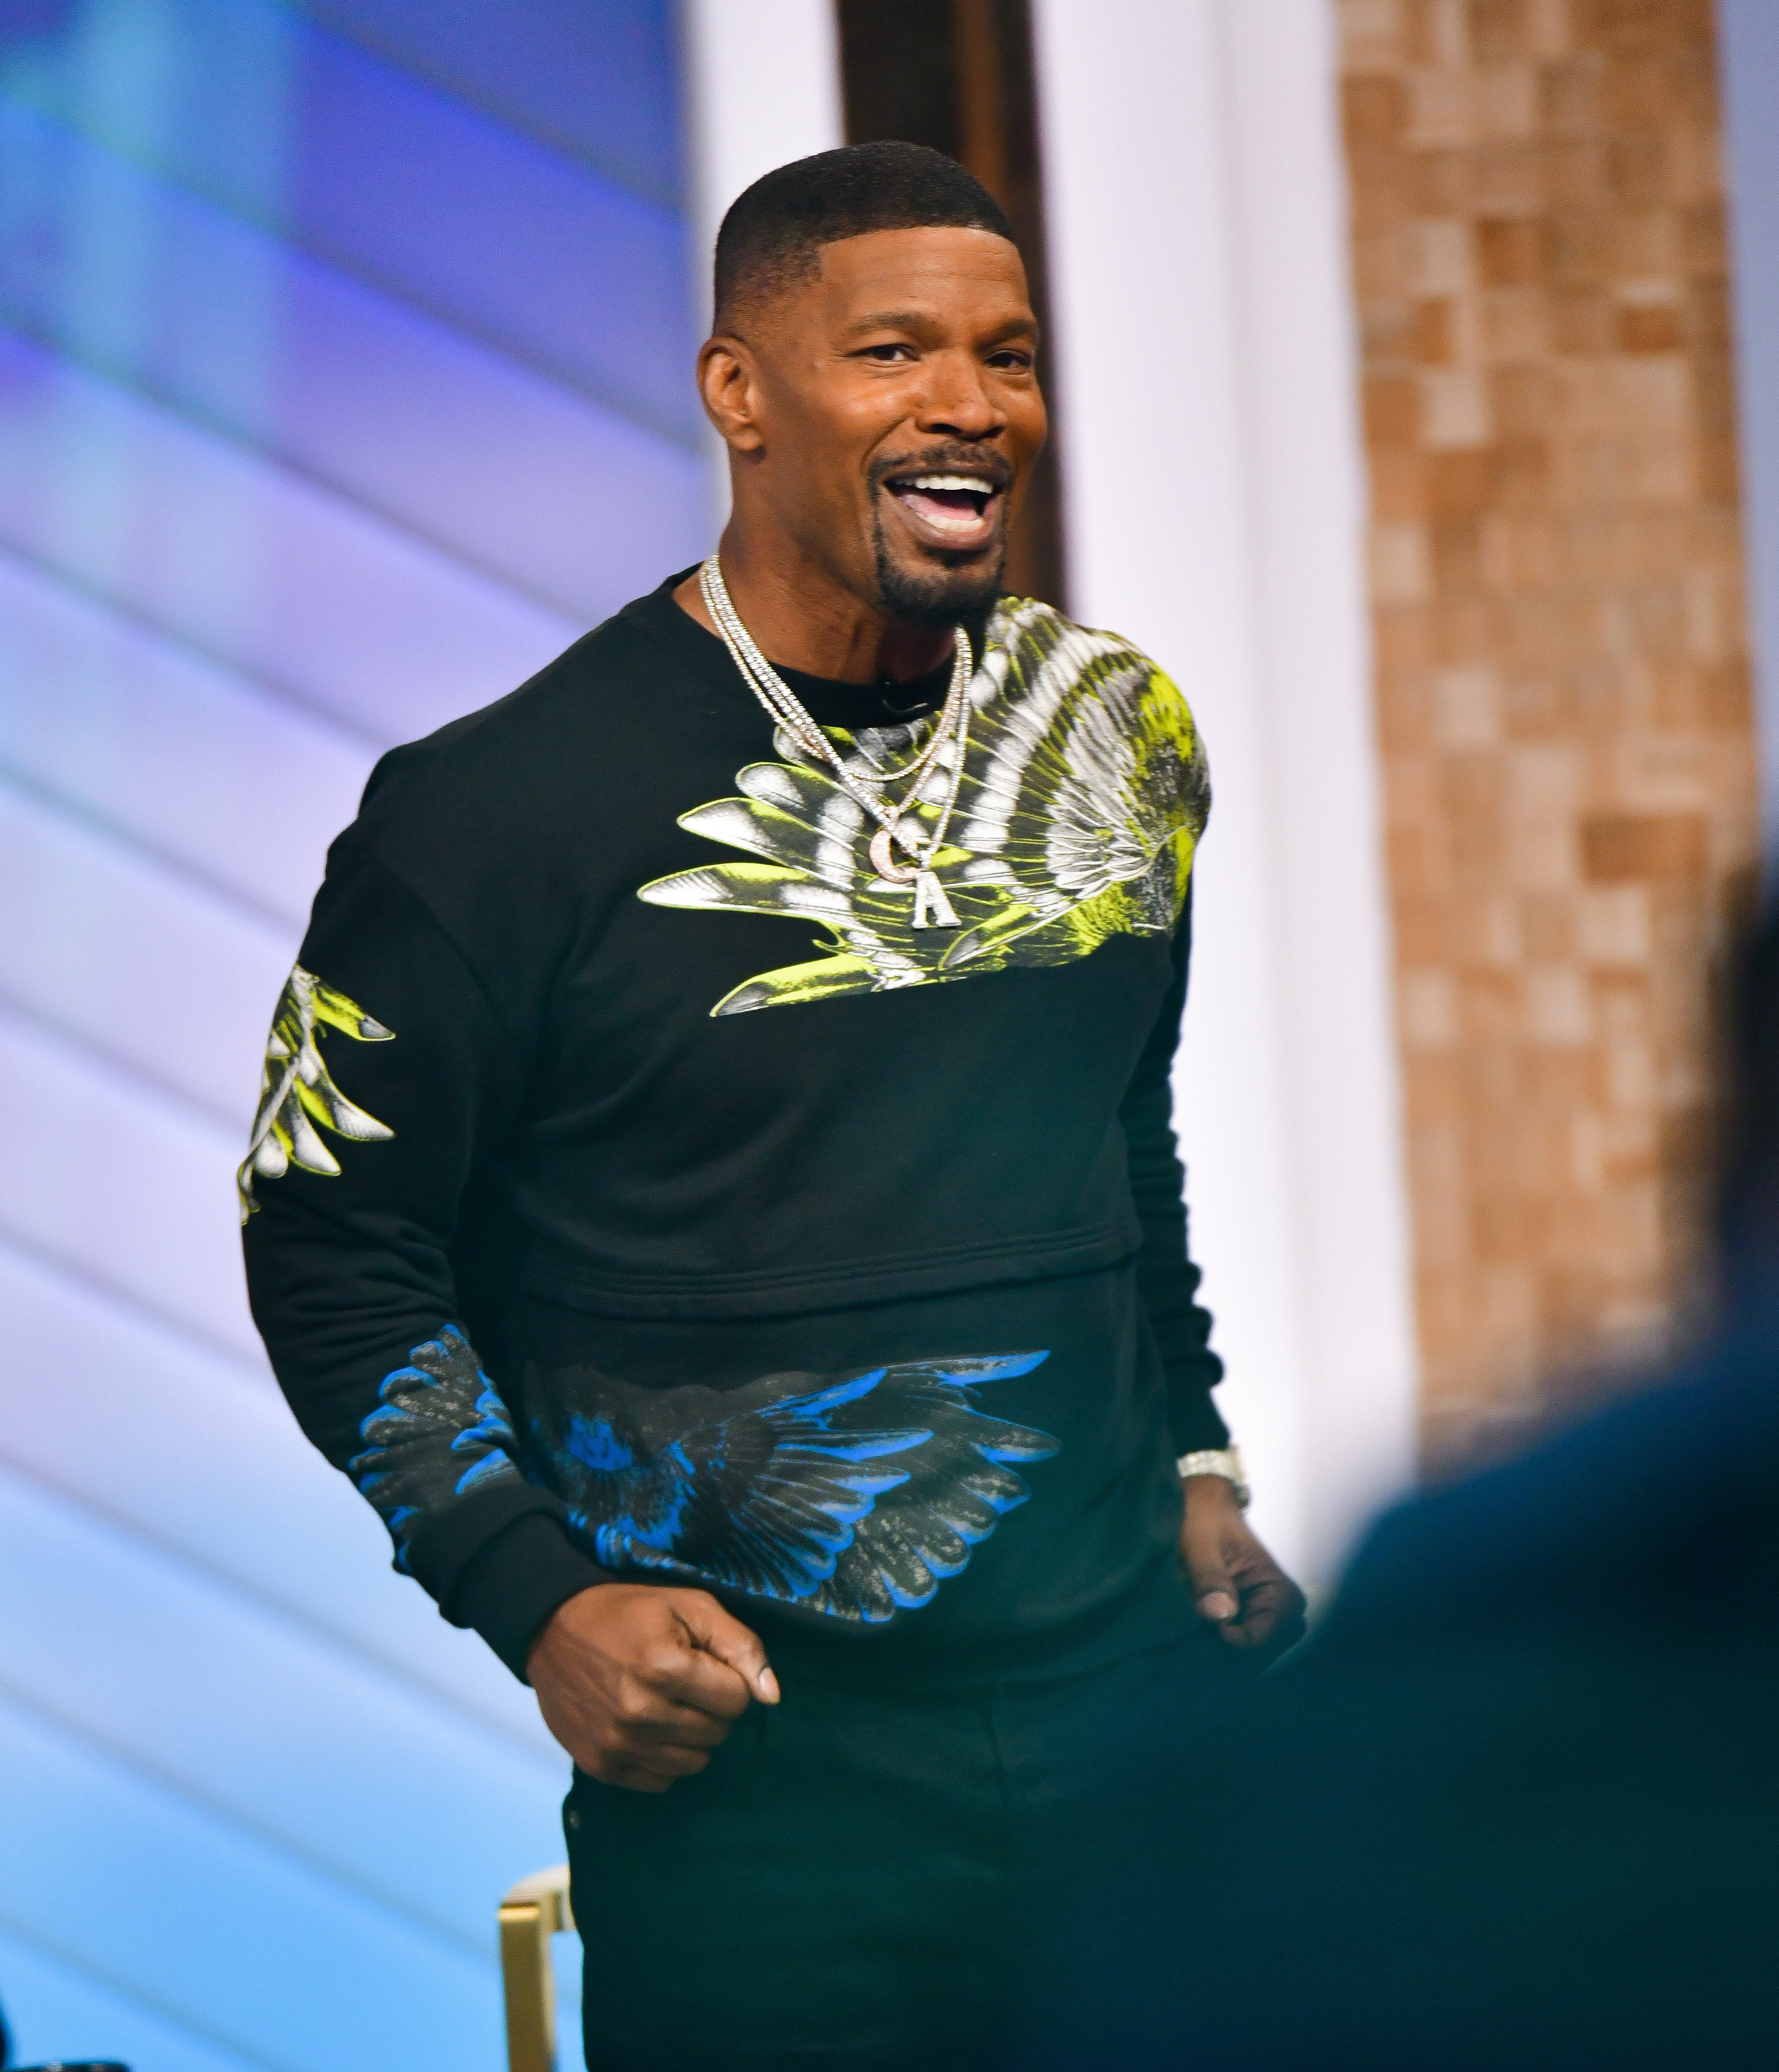 Jamie Foxx visits ABC's "Good Morning America" in Times Square on October 18, 2021 in New York City. | Source: Getty Images